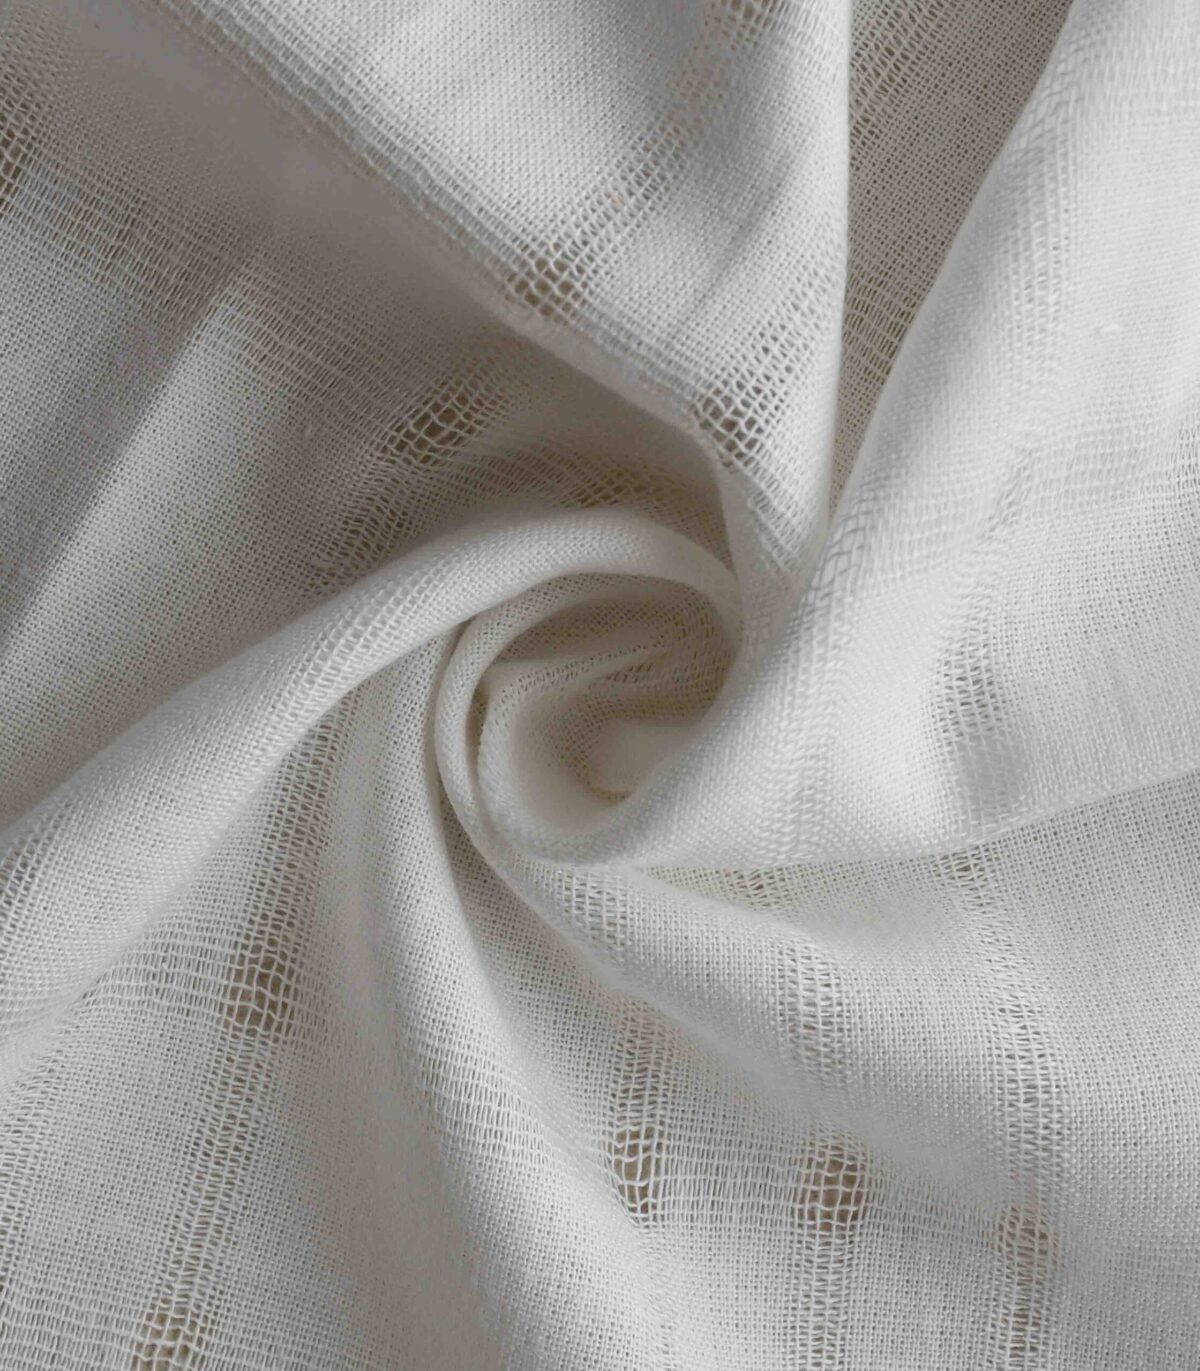 Dobby RFD Cotton Material Fabric